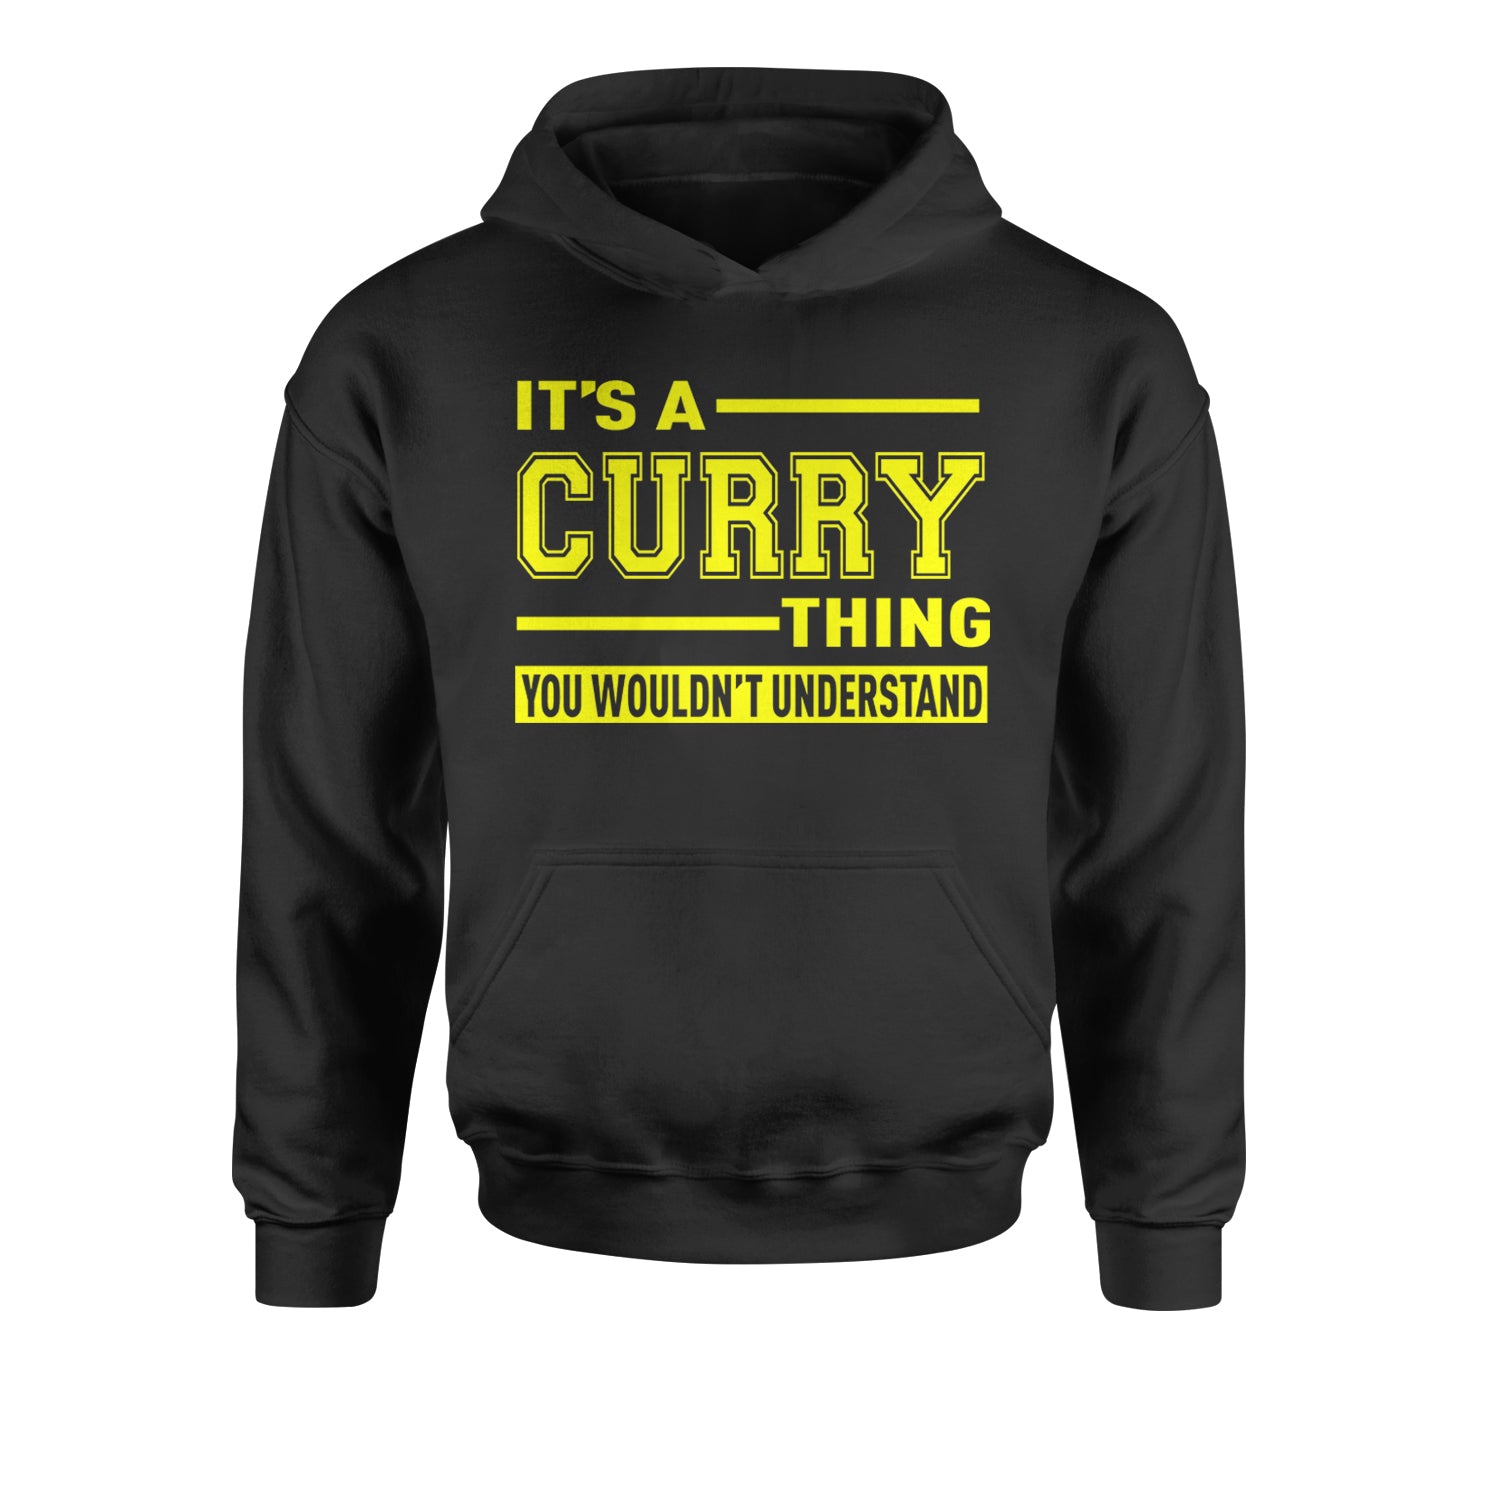 It's A Curry Thing, You Wouldn't Understand Basketball Youth-Sized Hoodie